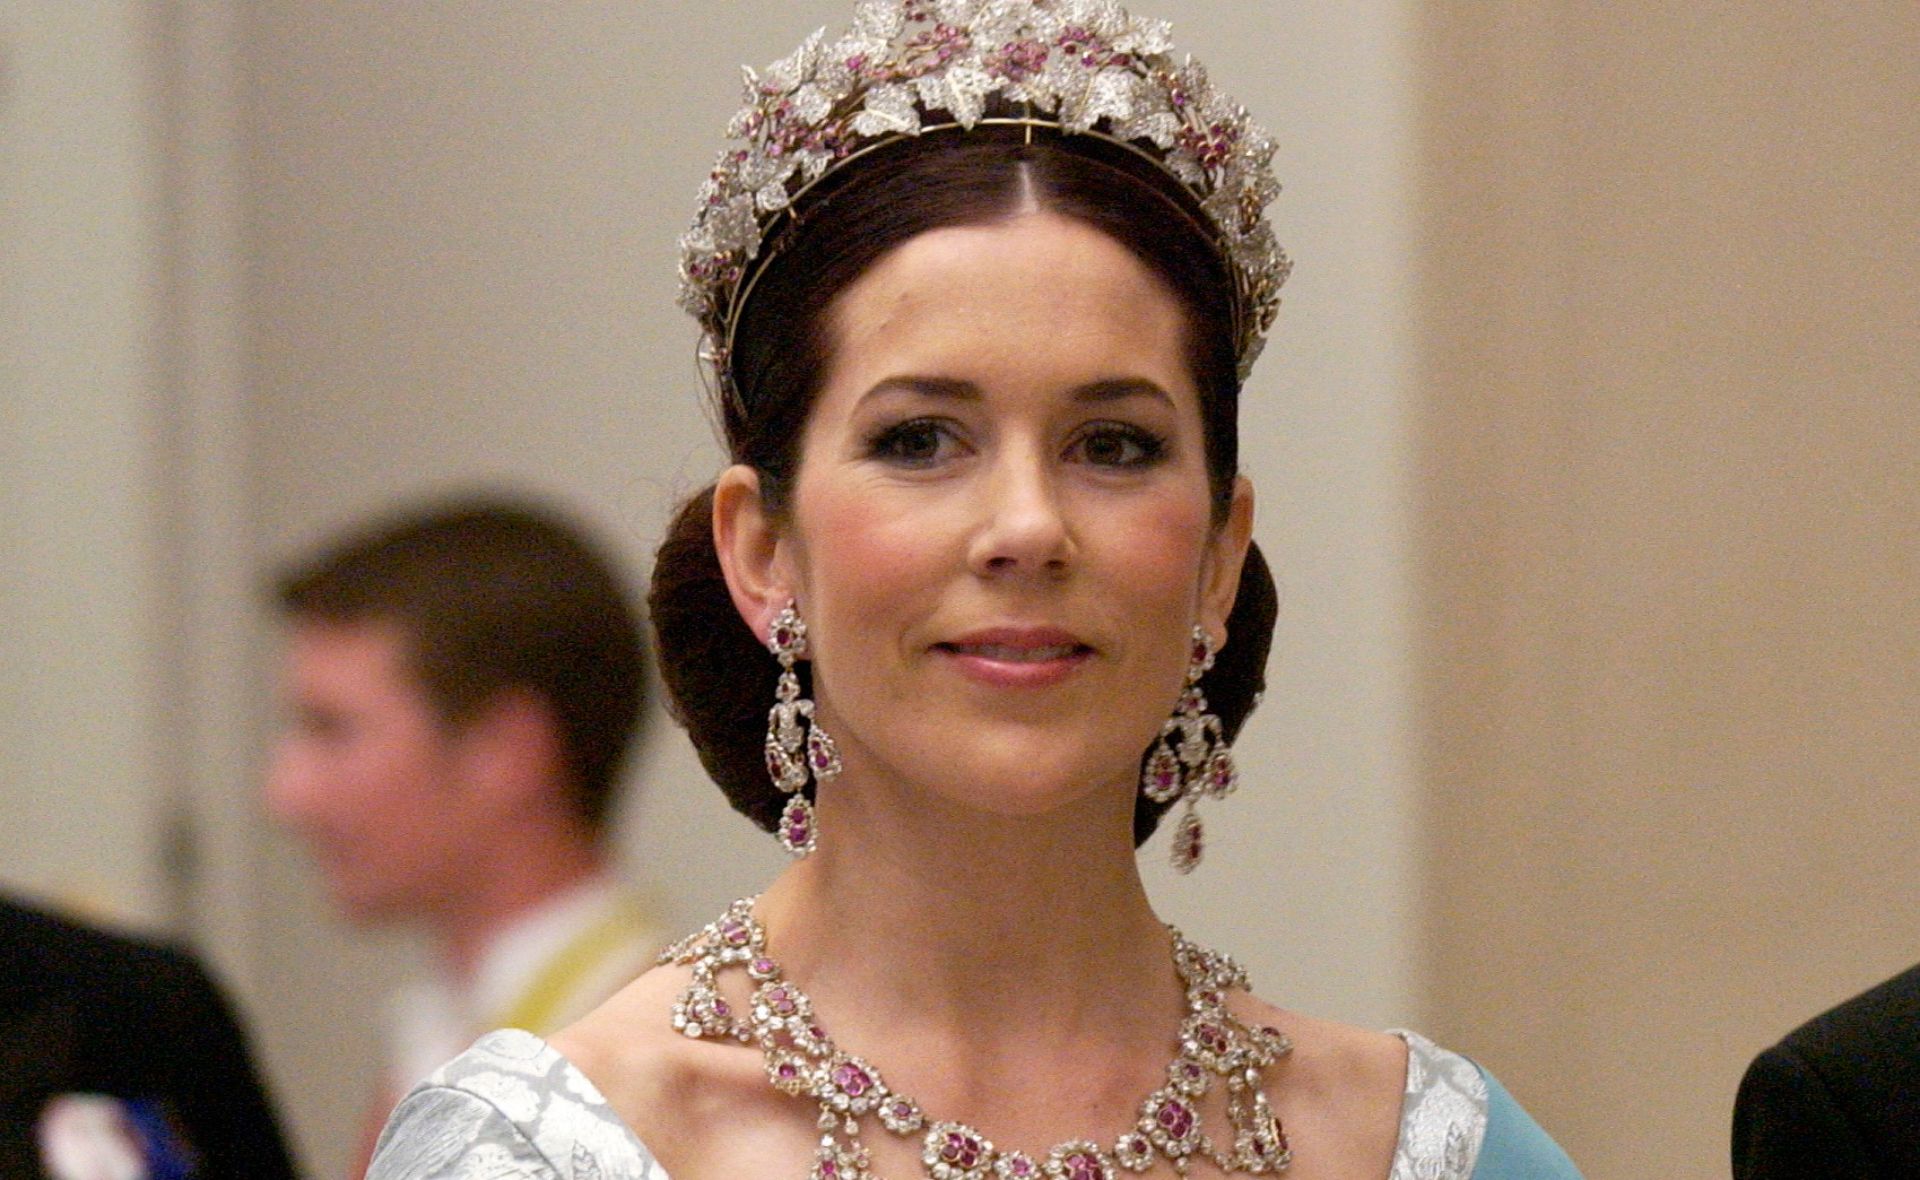 Princess Mary is in damage control mode after consequences arise from royal titles being stripped